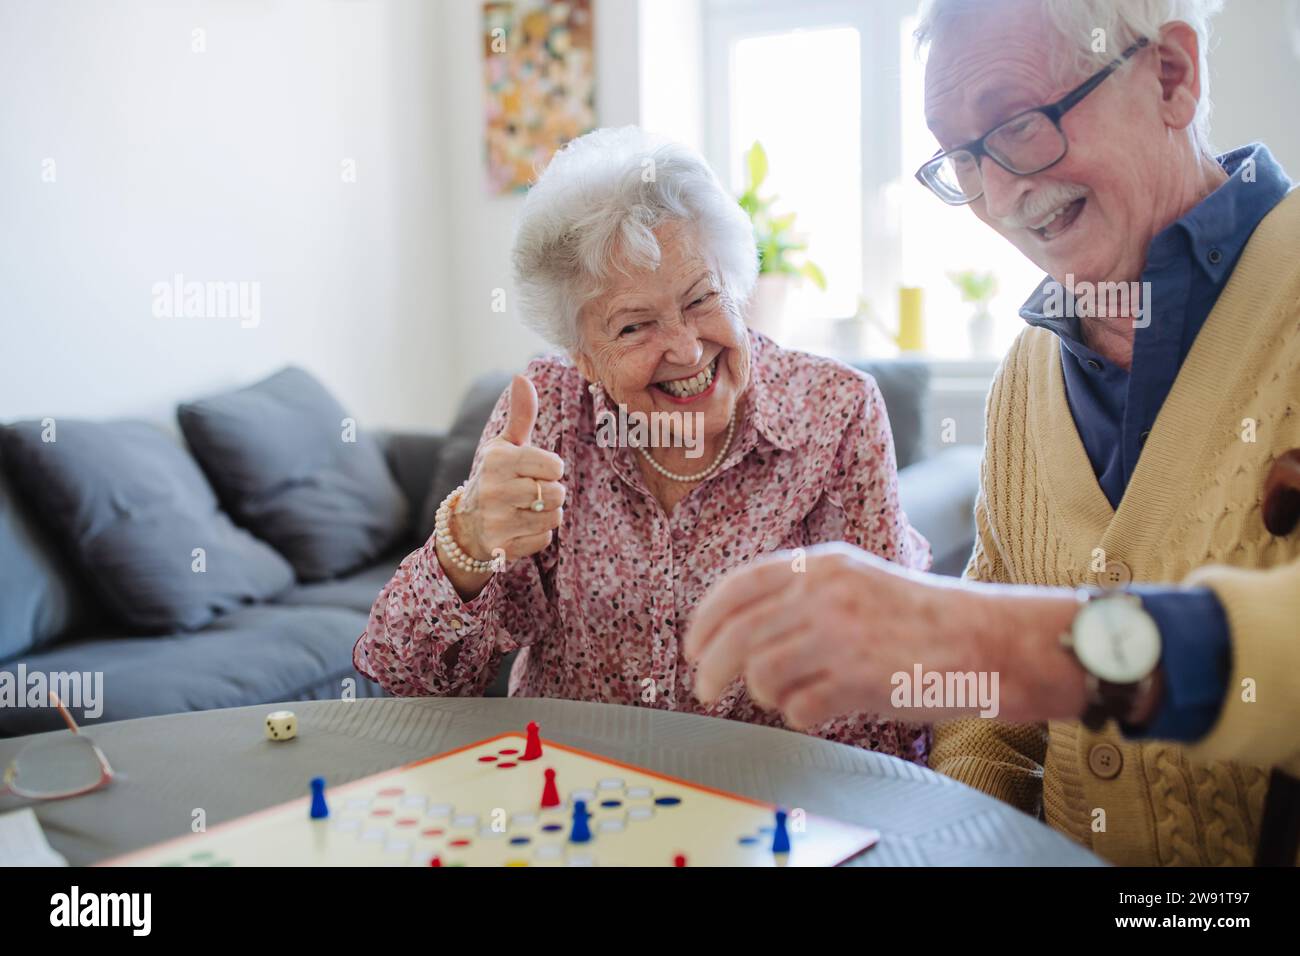 Cheerful woman gesturing thumbs up and playing ludo with man at table Stock Photo